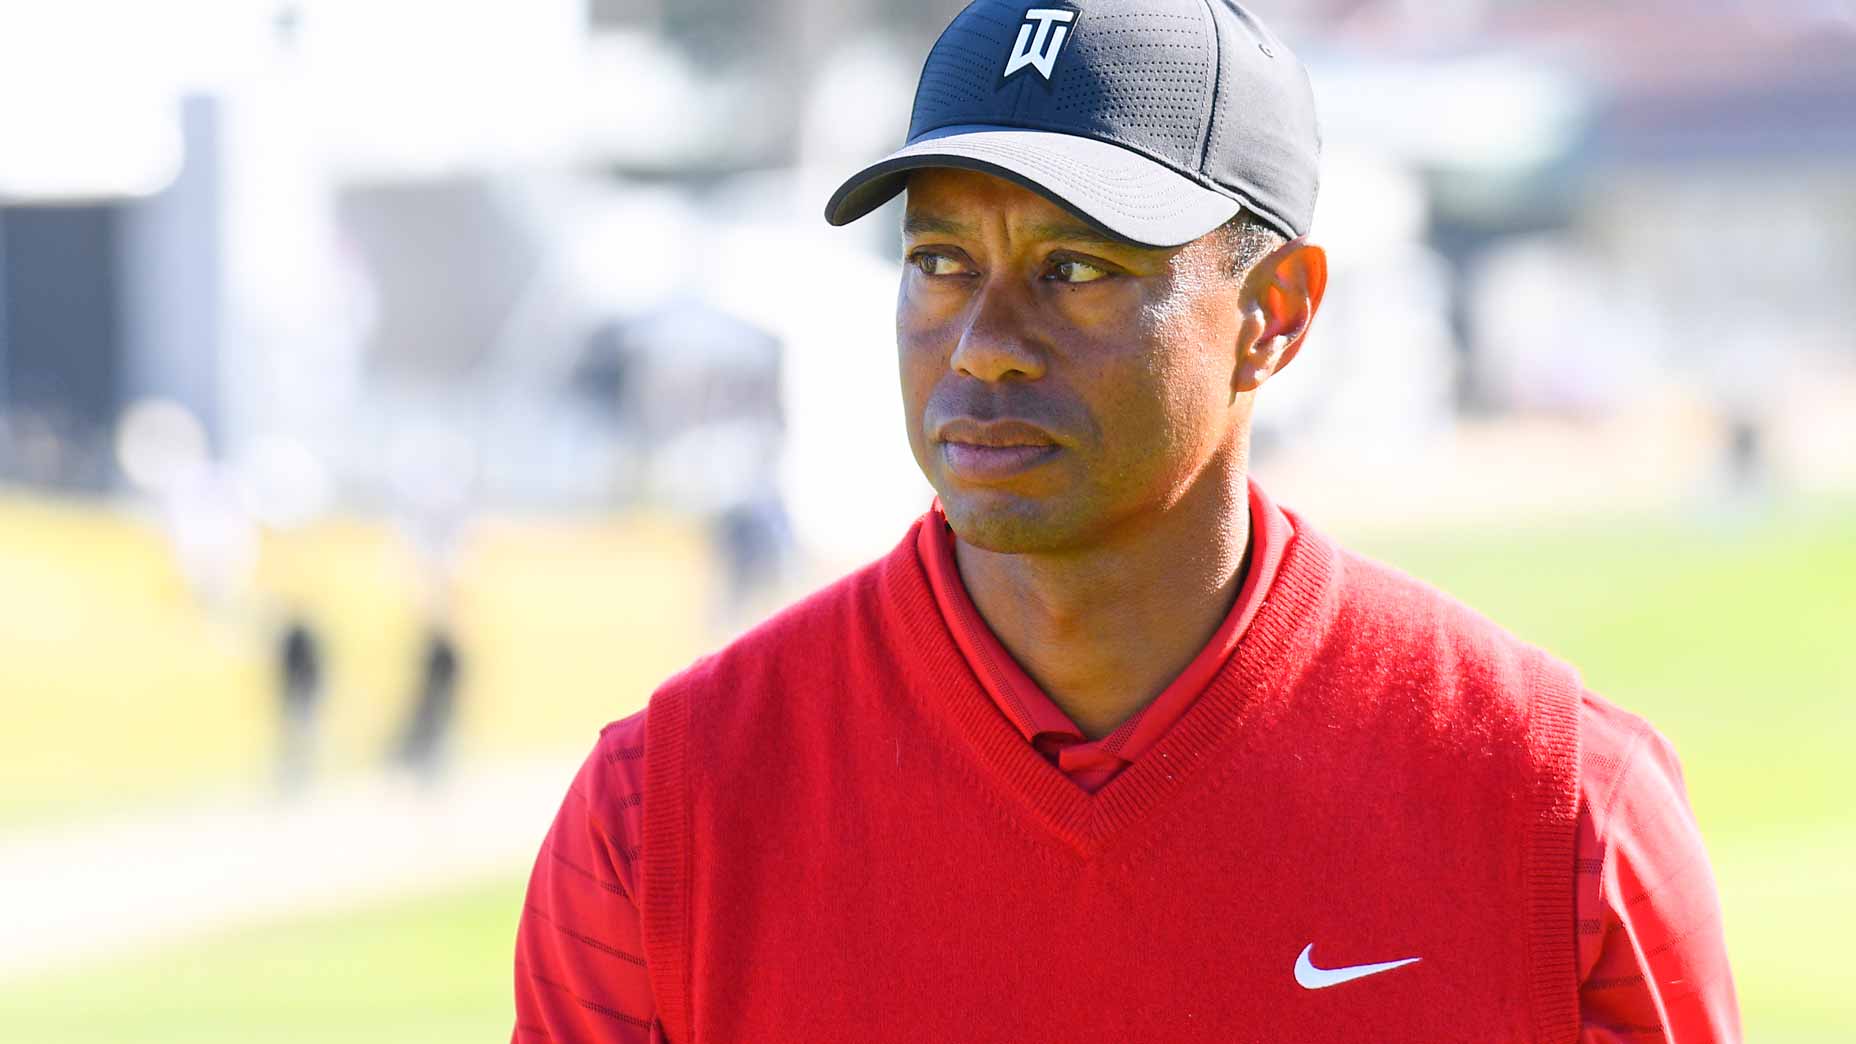 What tournaments will Tiger Woods play when PGA Tour season resumes?